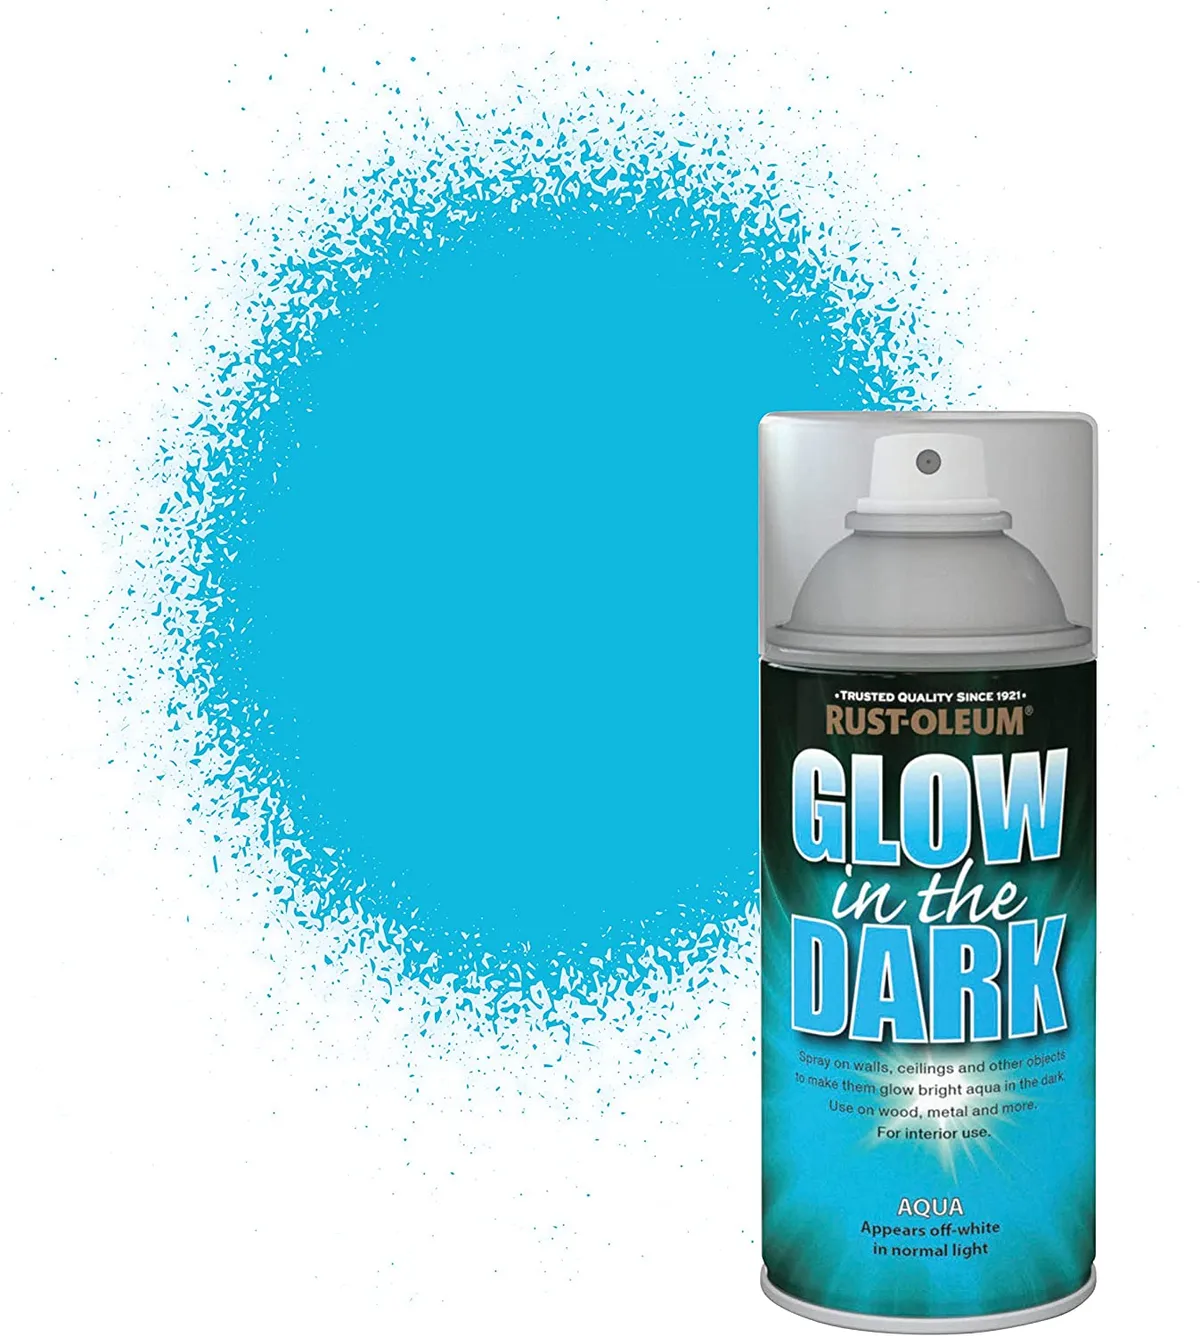 Ultra Bright Reflective Paint - high-visibility, reflective, paint  solution, outdoor use (8 oz)